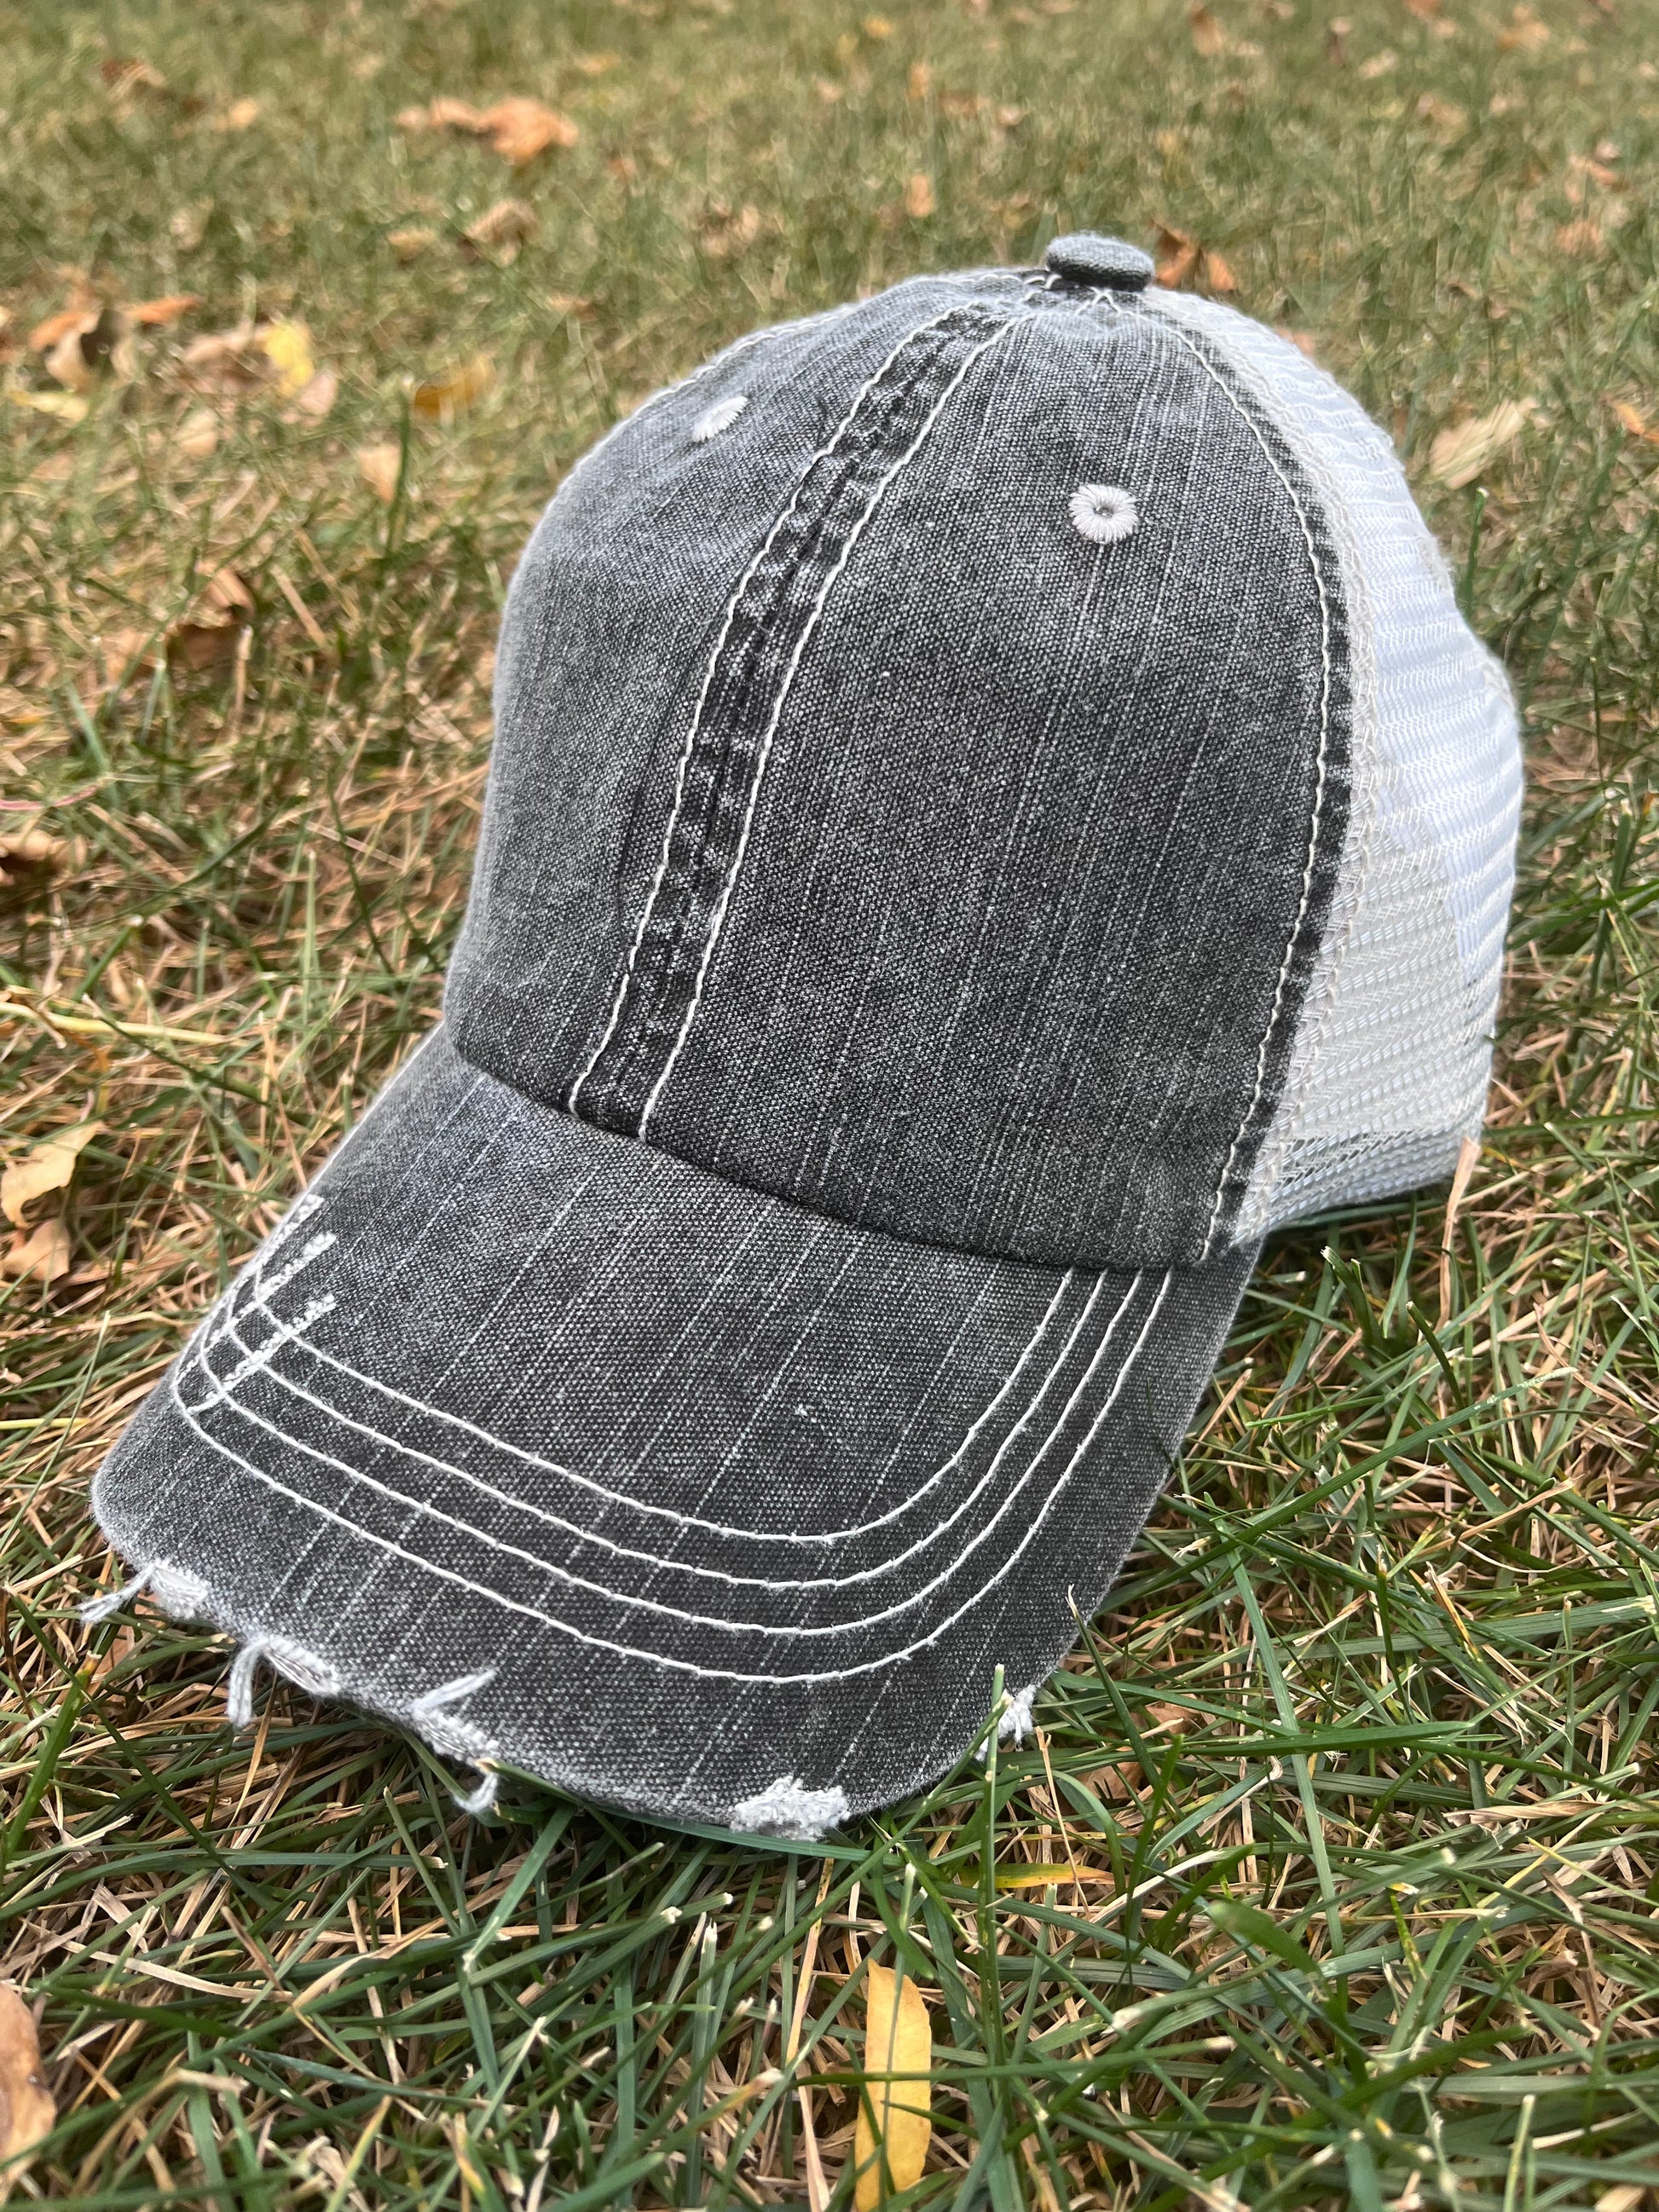 Hats Blank. Distressed Vintage Trucker Hat with adjustable. Gray. Leopard.